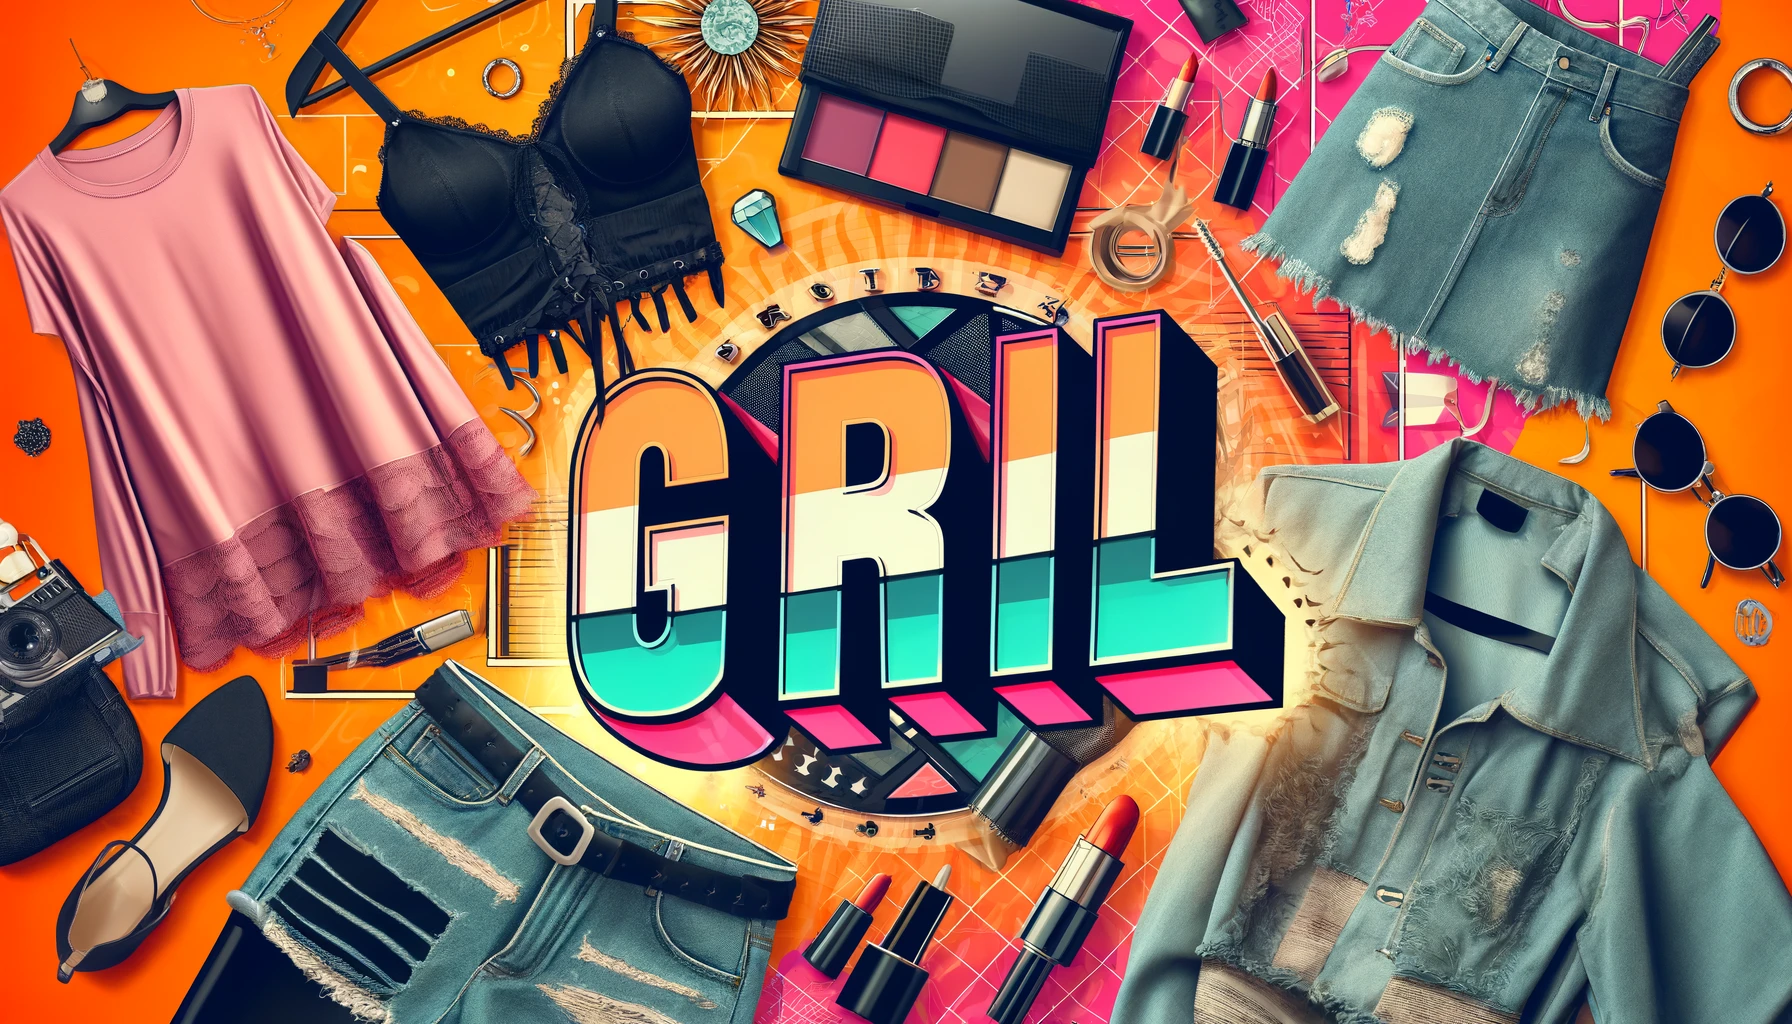 A stylish layout for a fashion brand named 'GRL' with a focus on popularity. The image features trendy and affordable clothing items displayed attractively. Incorporate the word 'GRL' prominently in the design. The background should be vibrant and fashionable, reflecting the brand's appeal to young women. The image should be in a 16:9 aspect ratio.